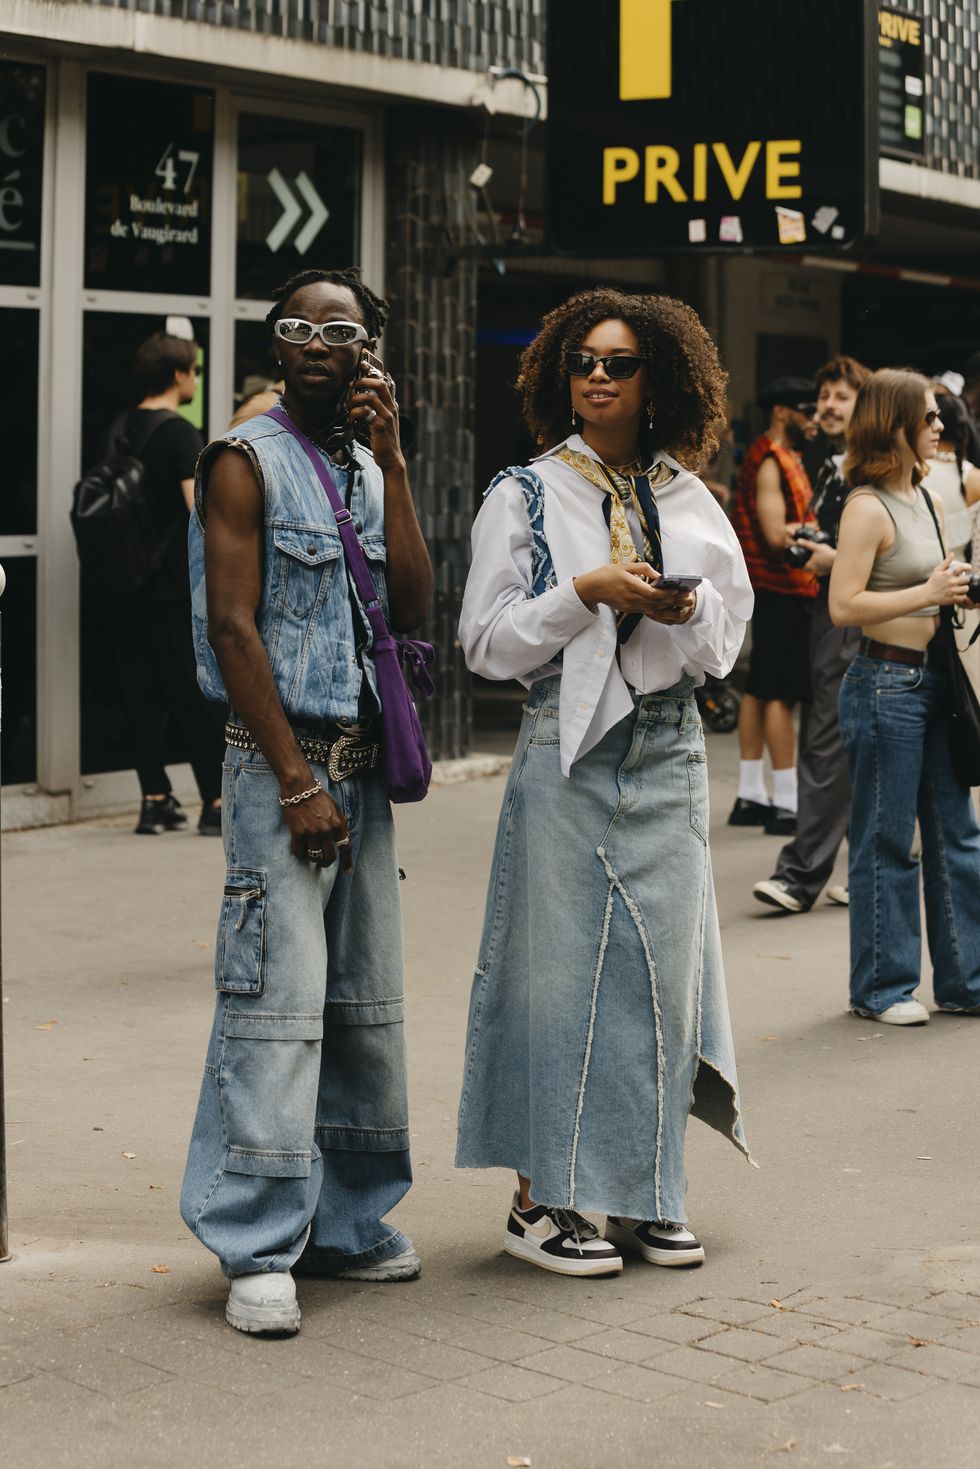 Are Ripped Jeans Still in Style in 2023?